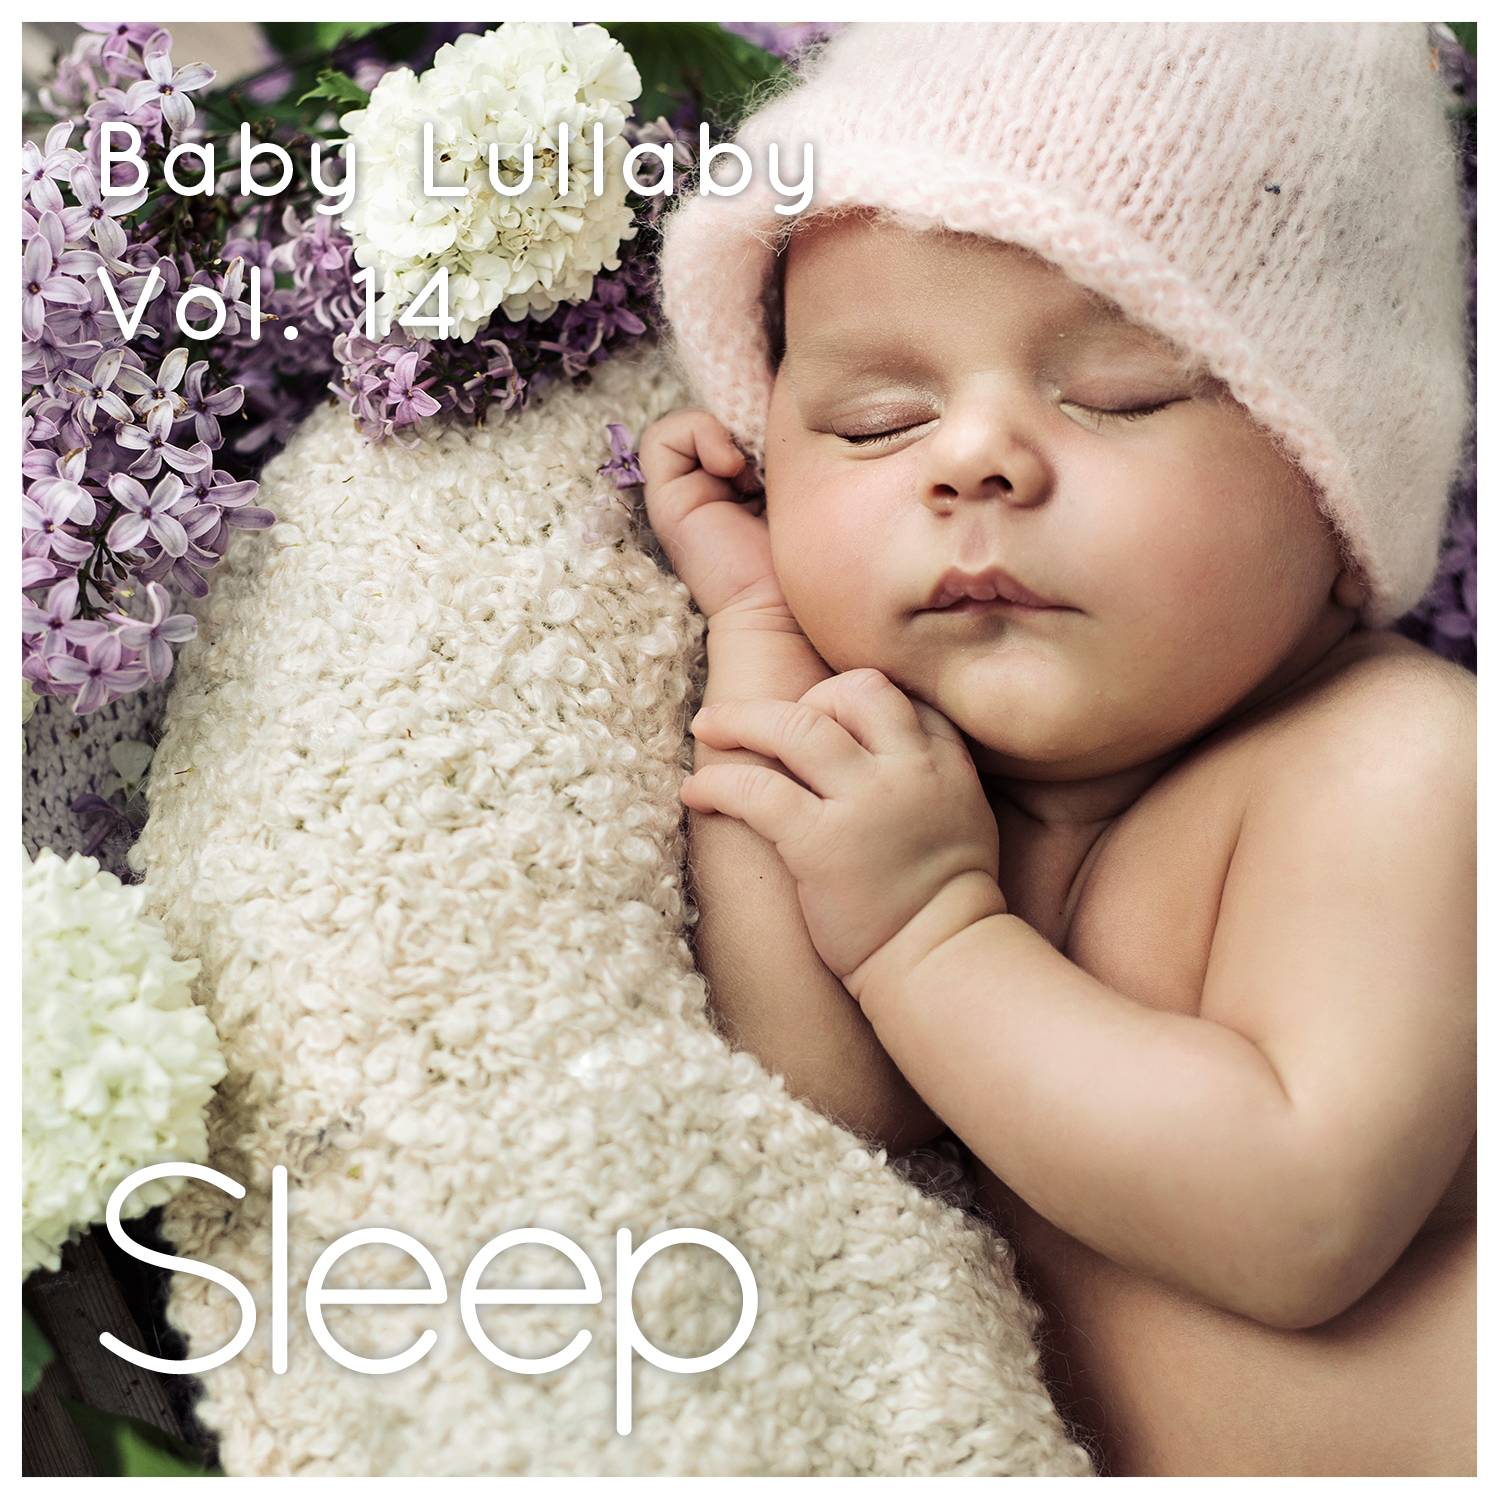 Baby Sleep Ambient Lullaby, Pt. 67